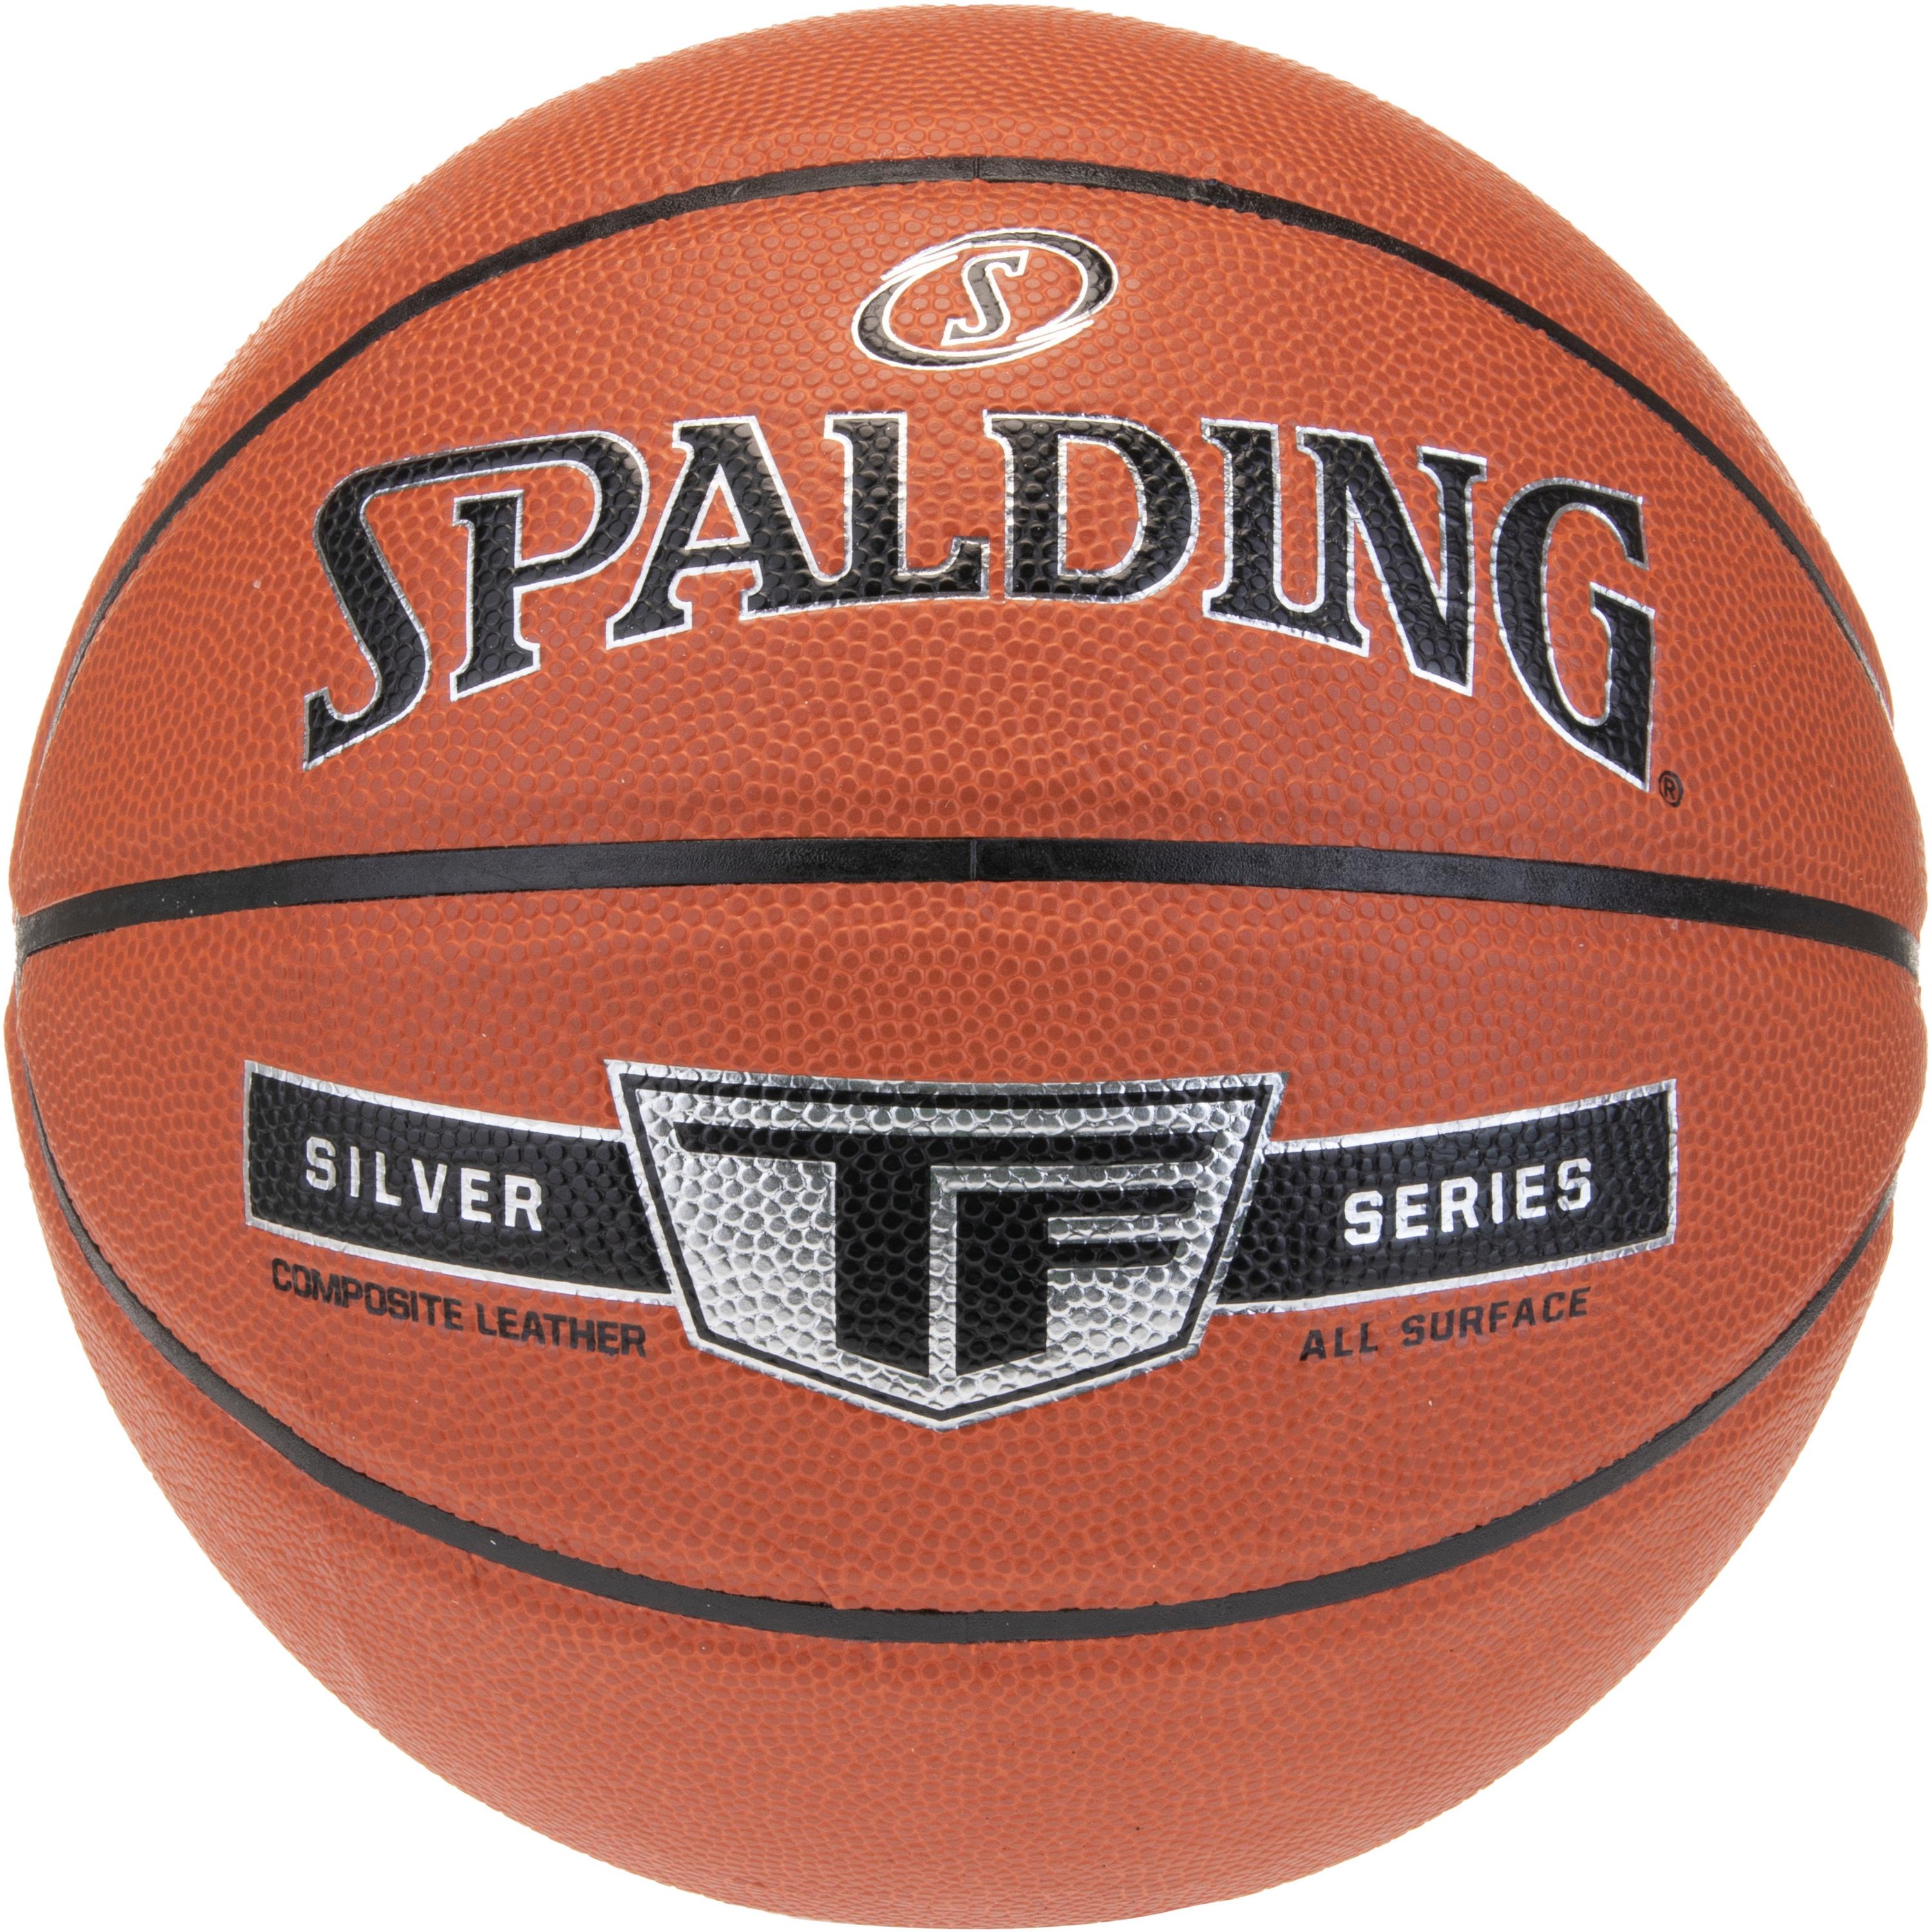 Image of Spalding TF Silver Composite Basketball